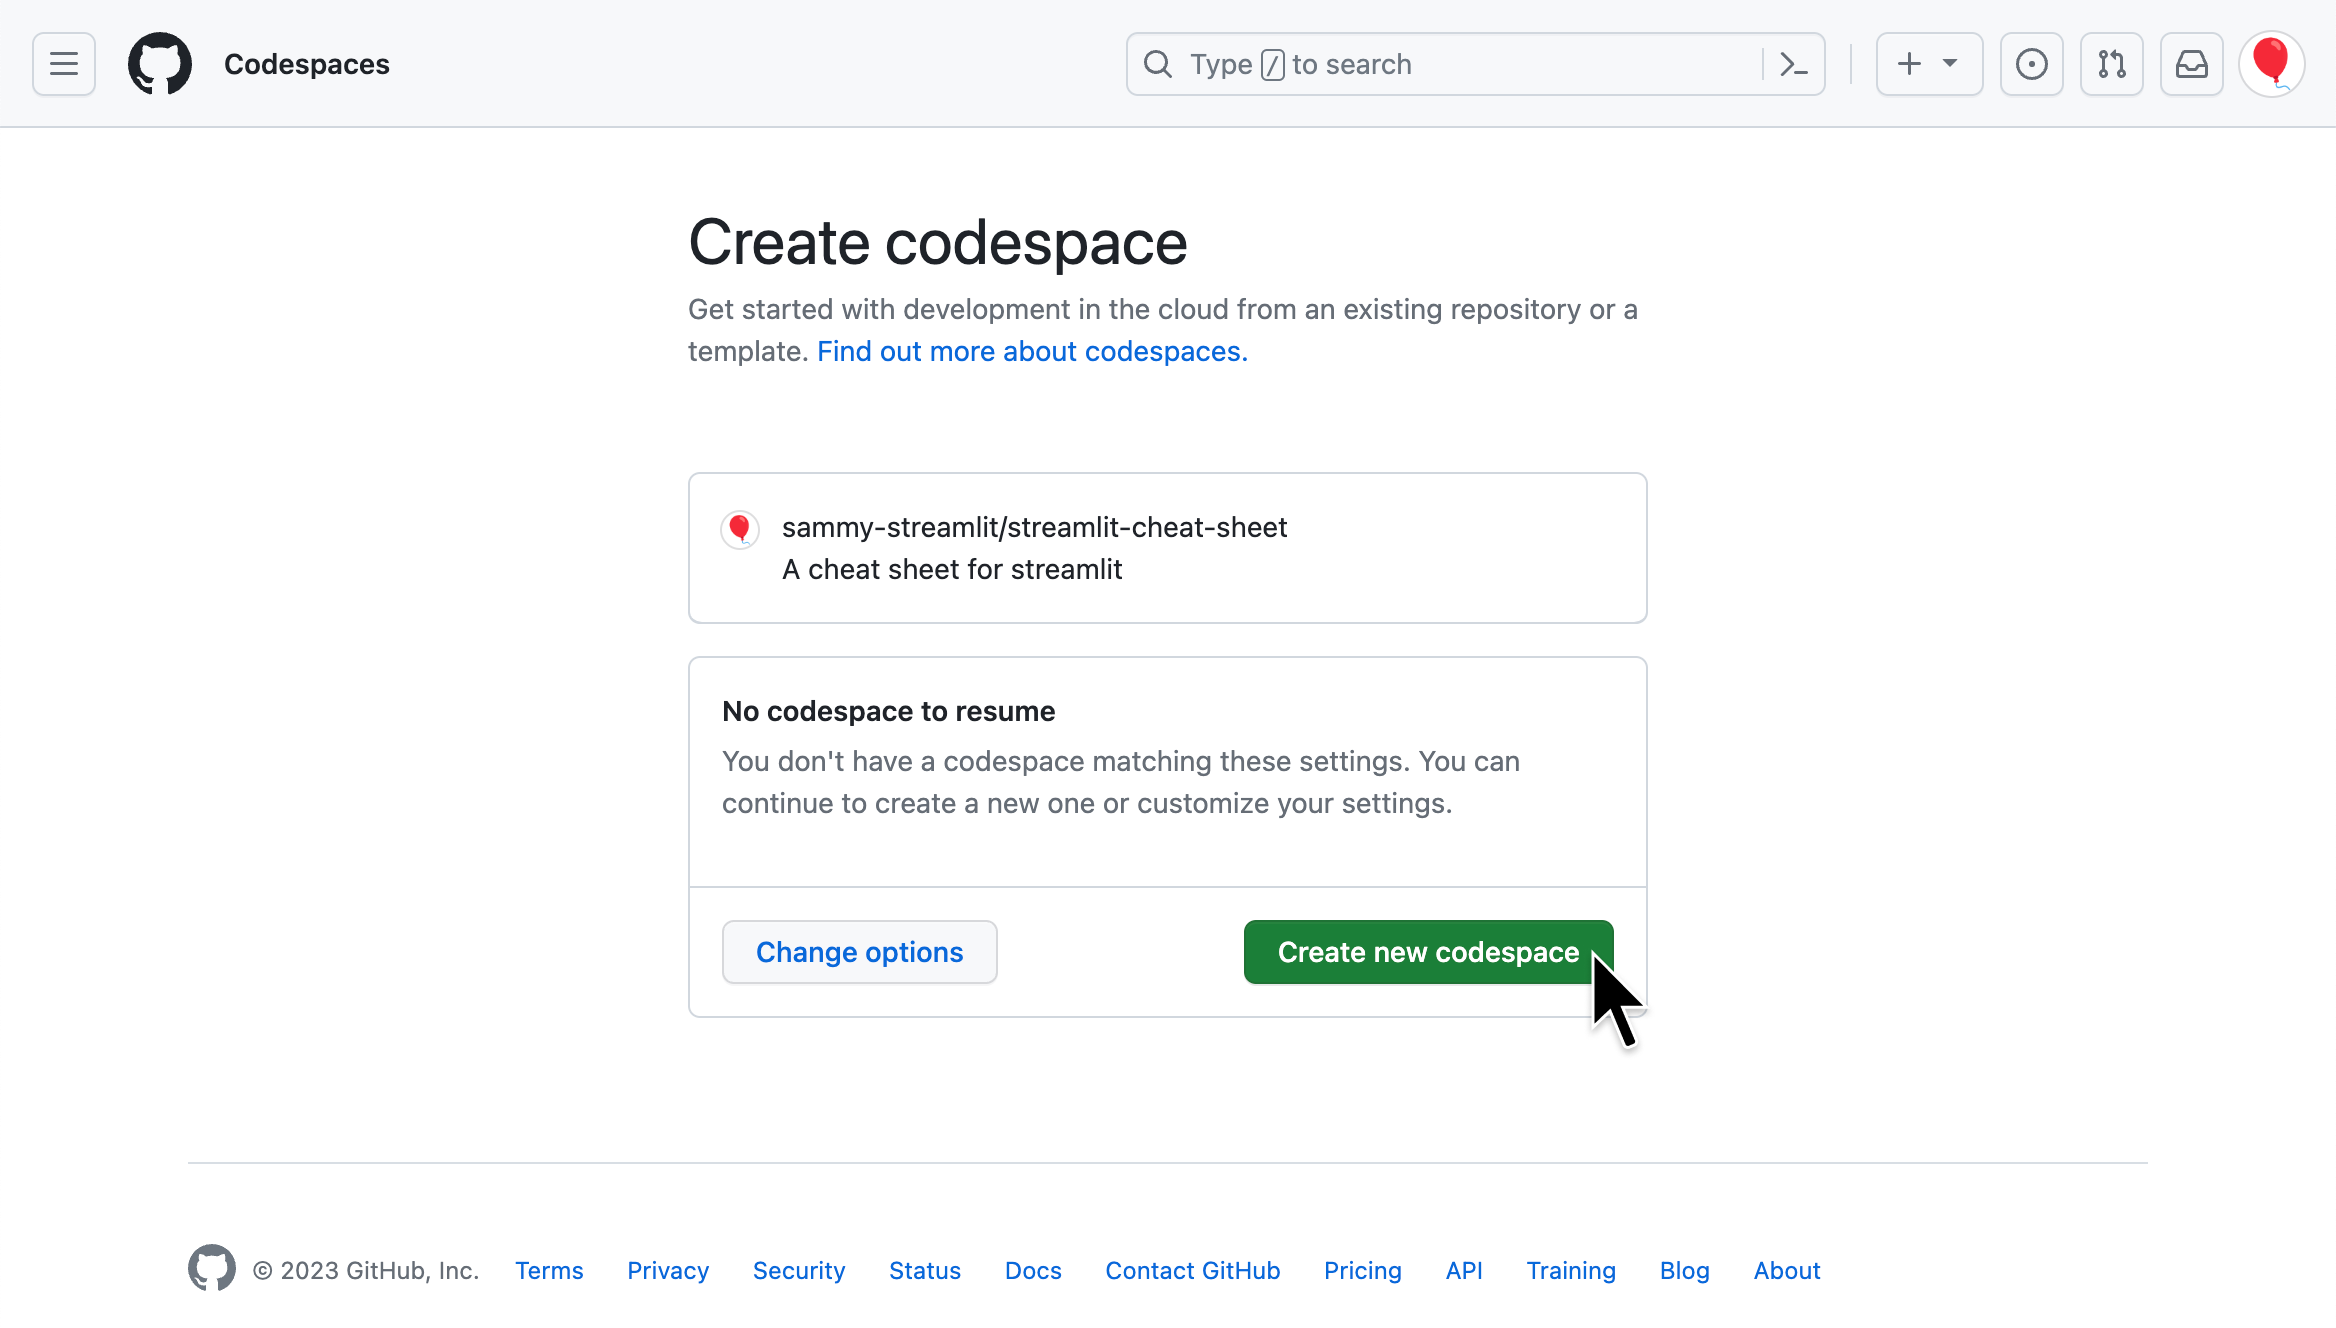 Create a codespace on your GitHub account